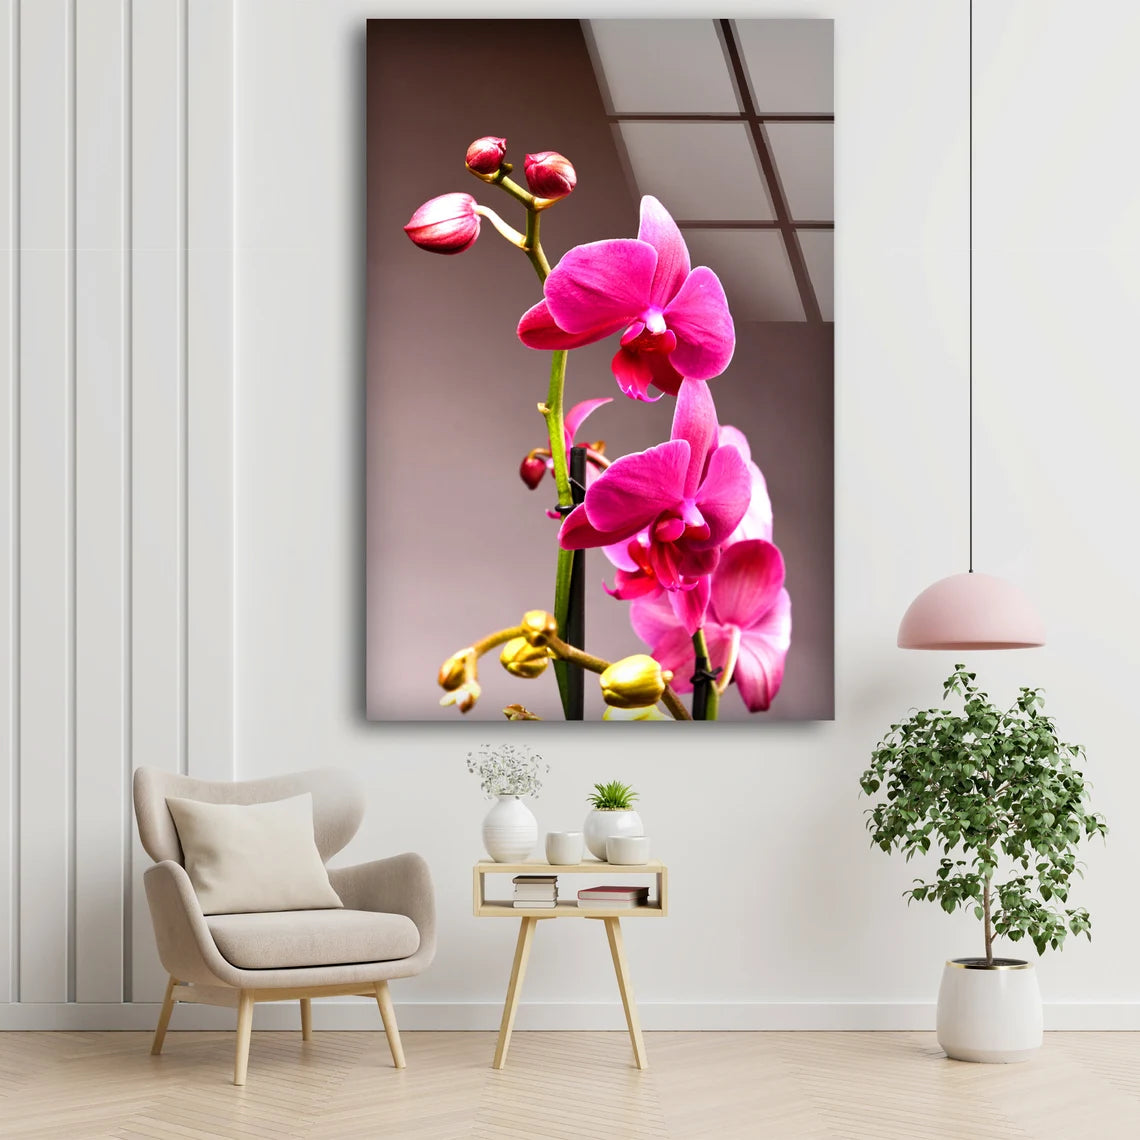 Pink Orchid Flowers Photograph Acrylic Glass Print Tempered Glass Wall Art 100% Made in Australia Ready to Hang